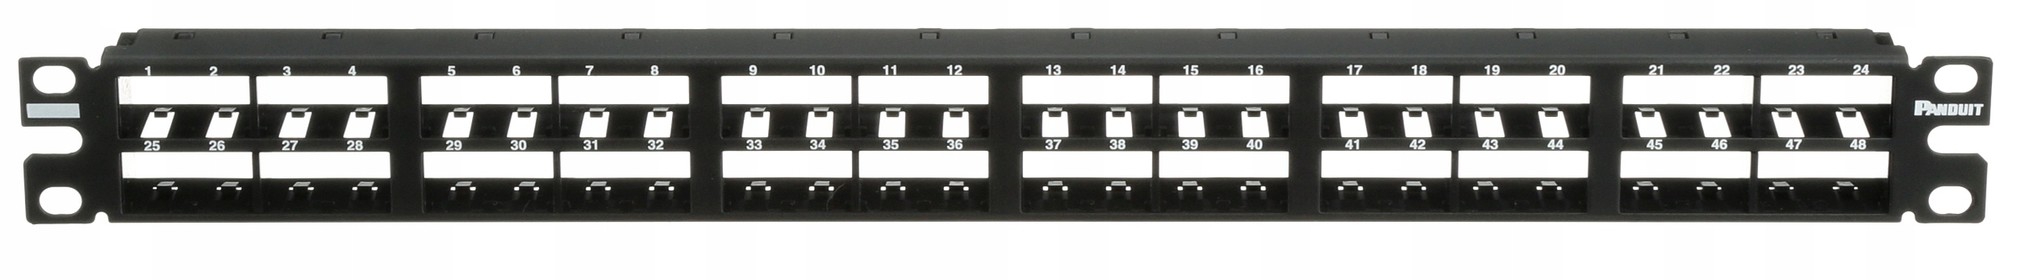 Patch panel Patchpanel 19